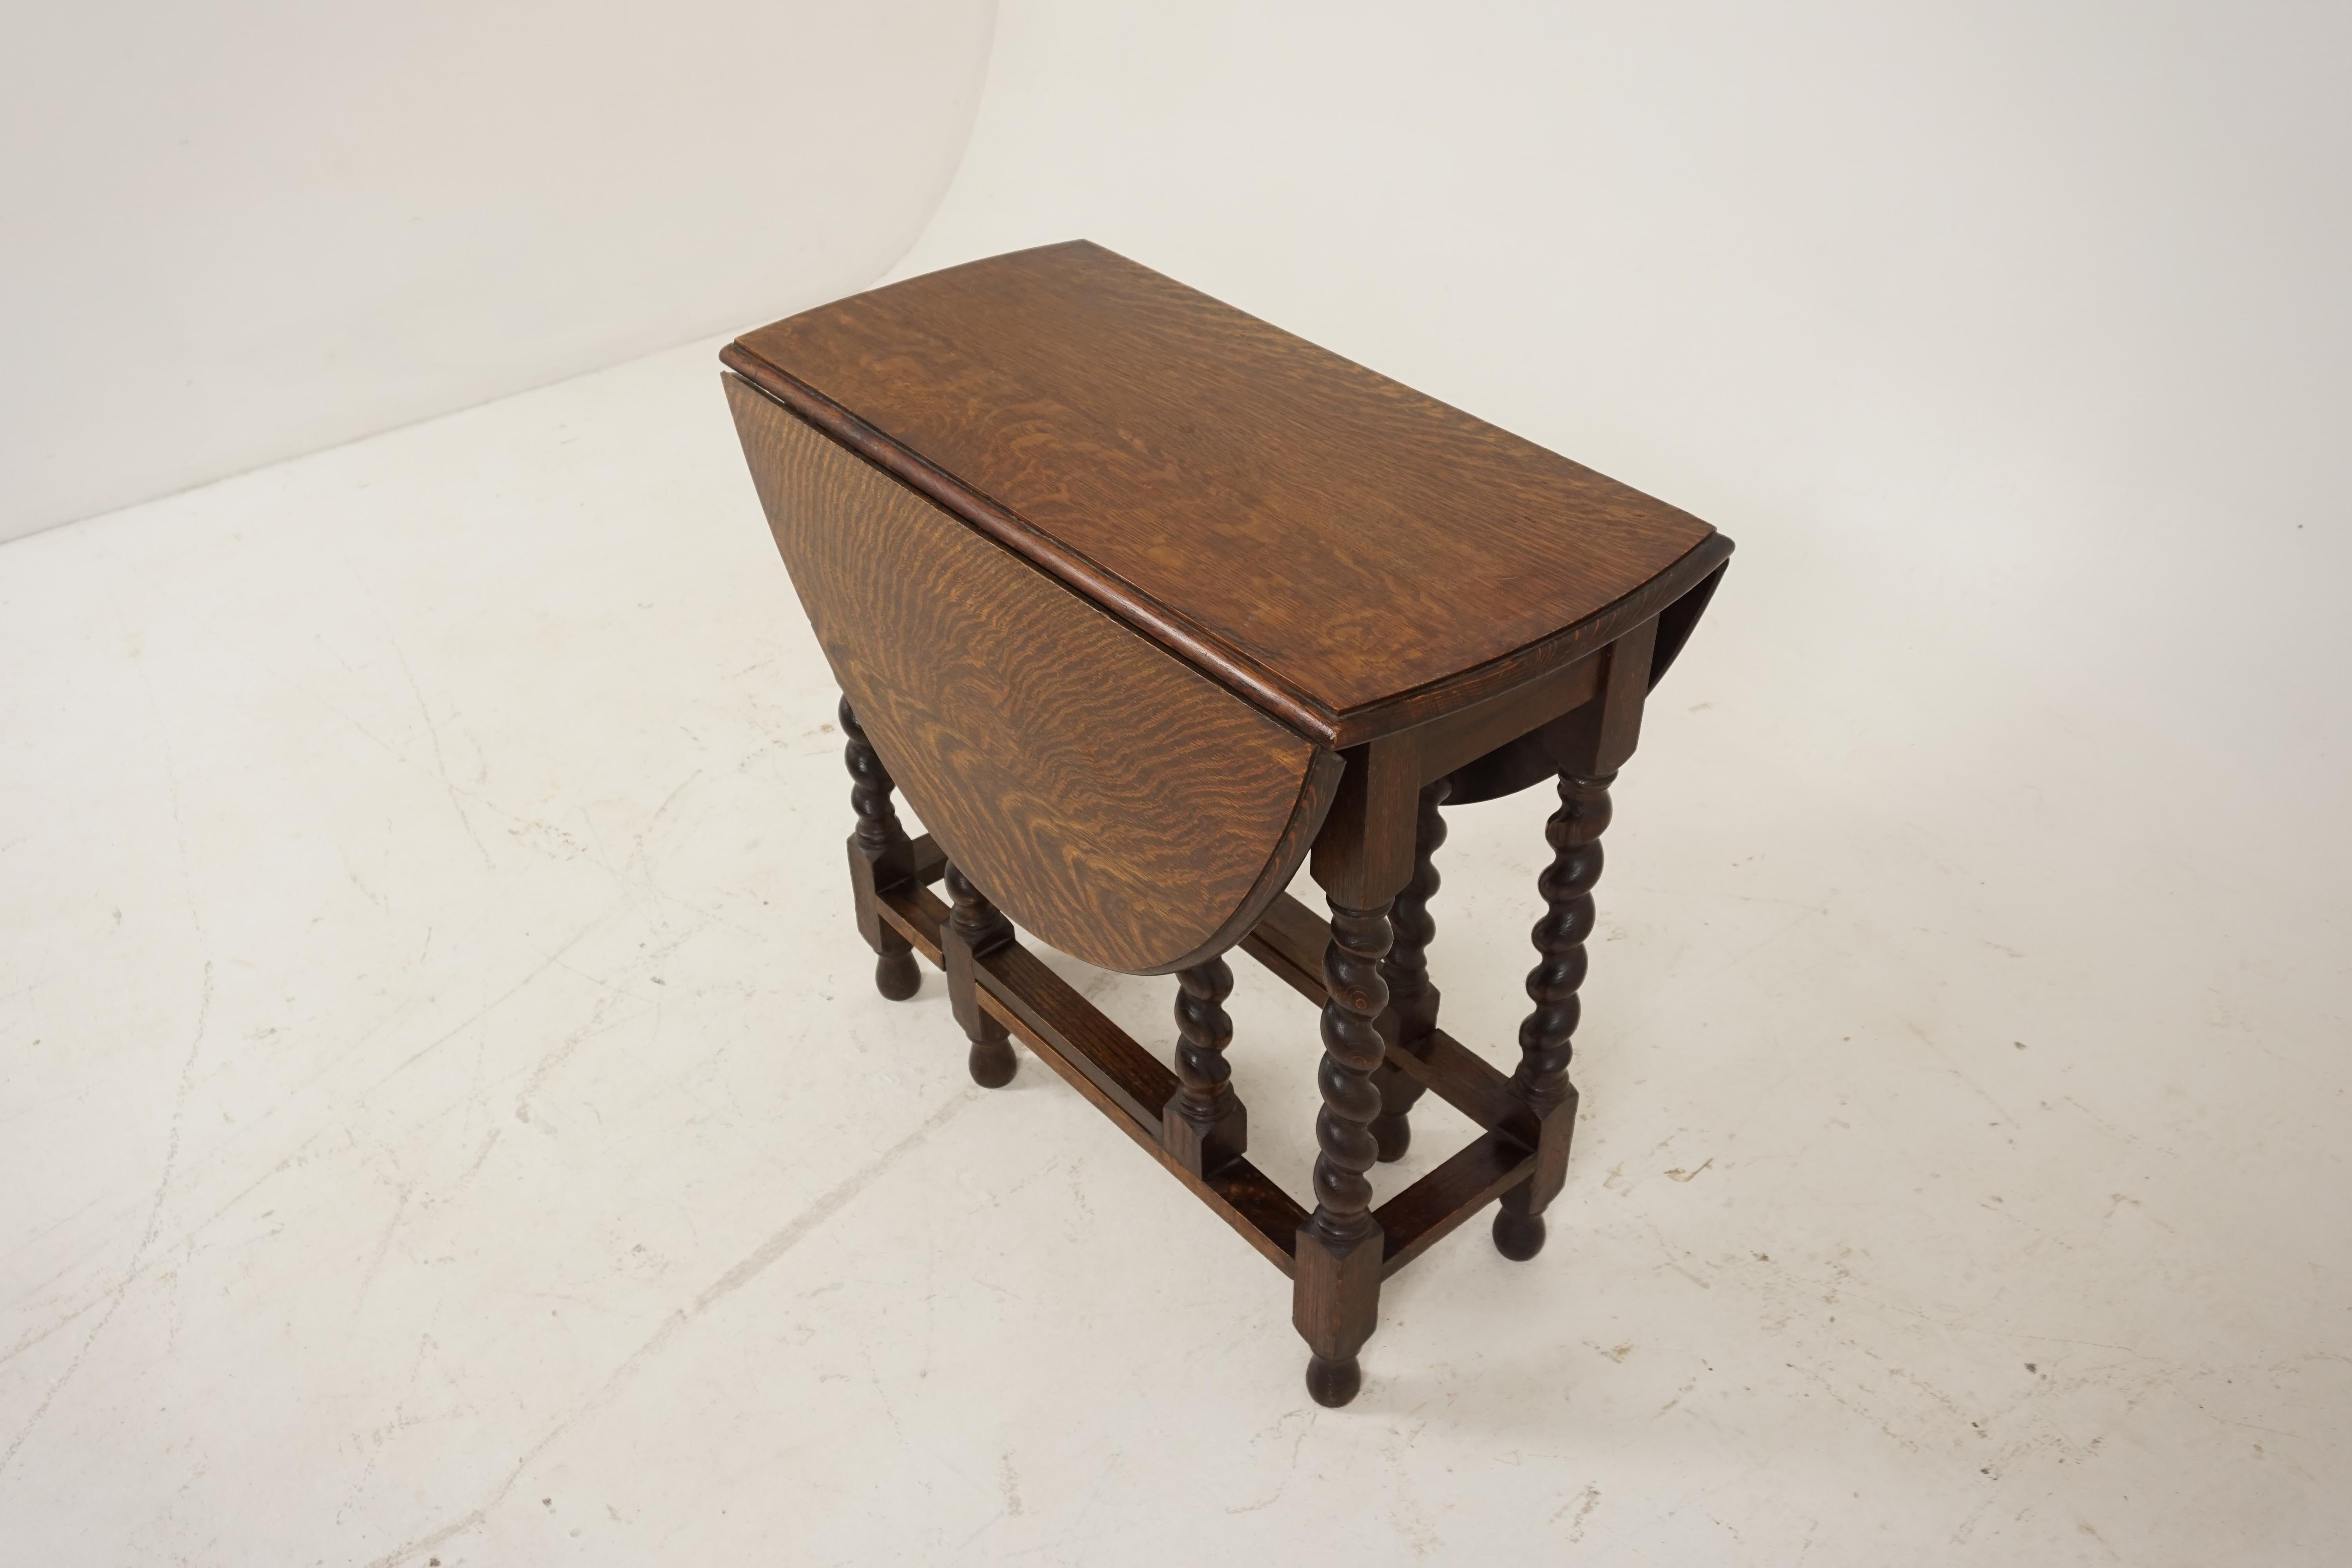 Antique gateleg table, tiger oak, barley twist, drop leaf table, Scotland, 1920

Scotland, 1920
Solid tiger oak construction
Original finish
Moulded rectangular top
Two oval drop leaves to the sides
Ending on thick barley twist